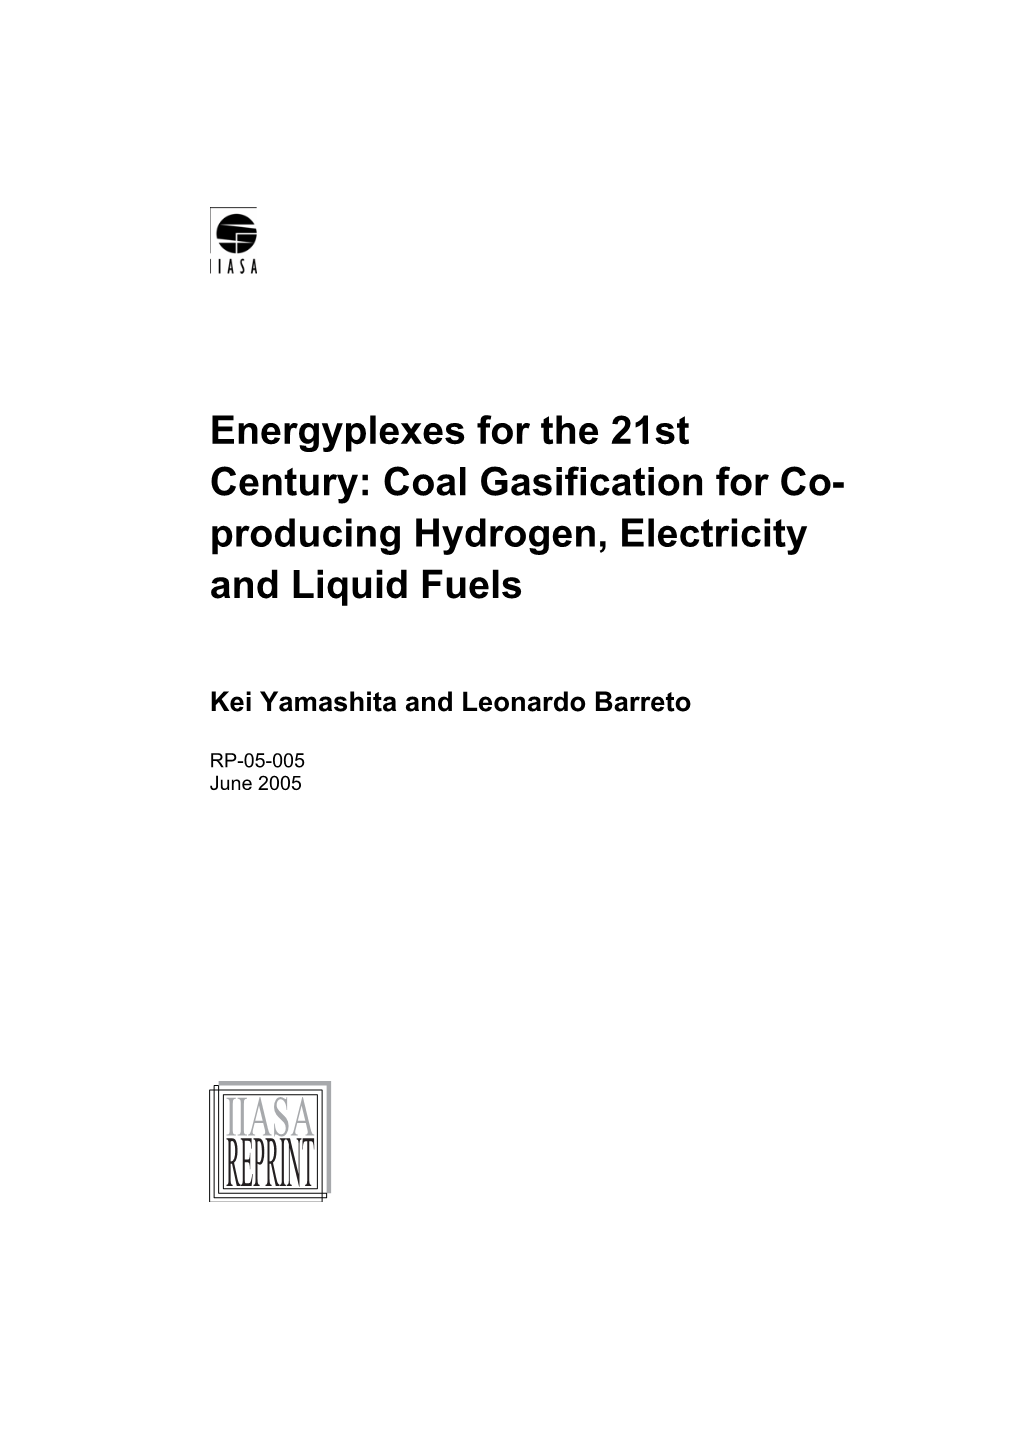 Energyplexes for the 21St Century: Coal Gasification for Co- Producing Hydrogen, Electricity and Liquid Fuels